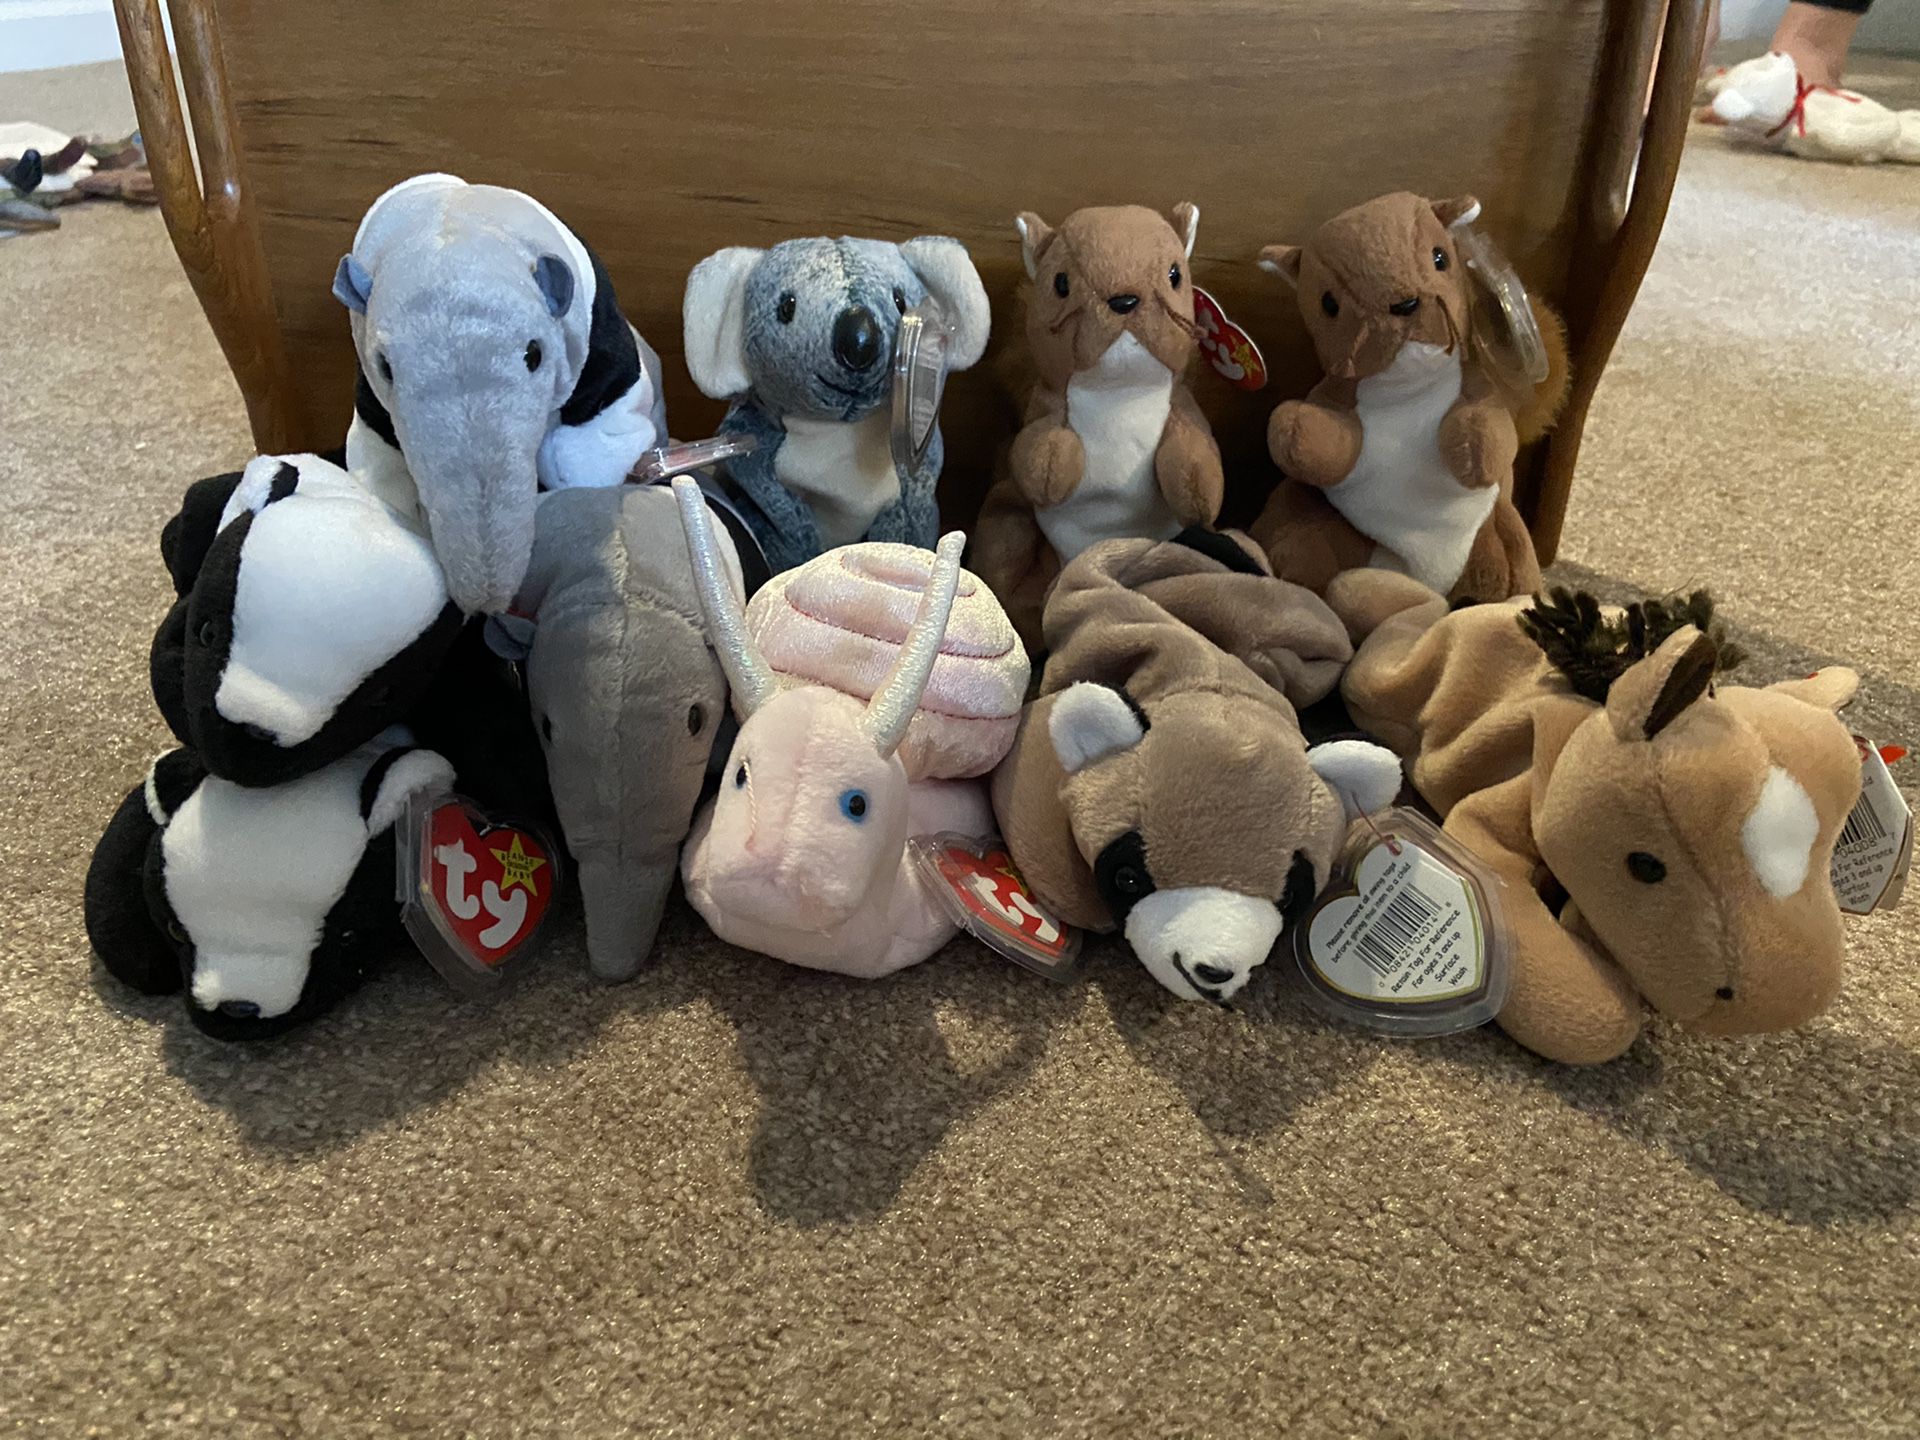 Miscellaneous beanie babies - all have tags